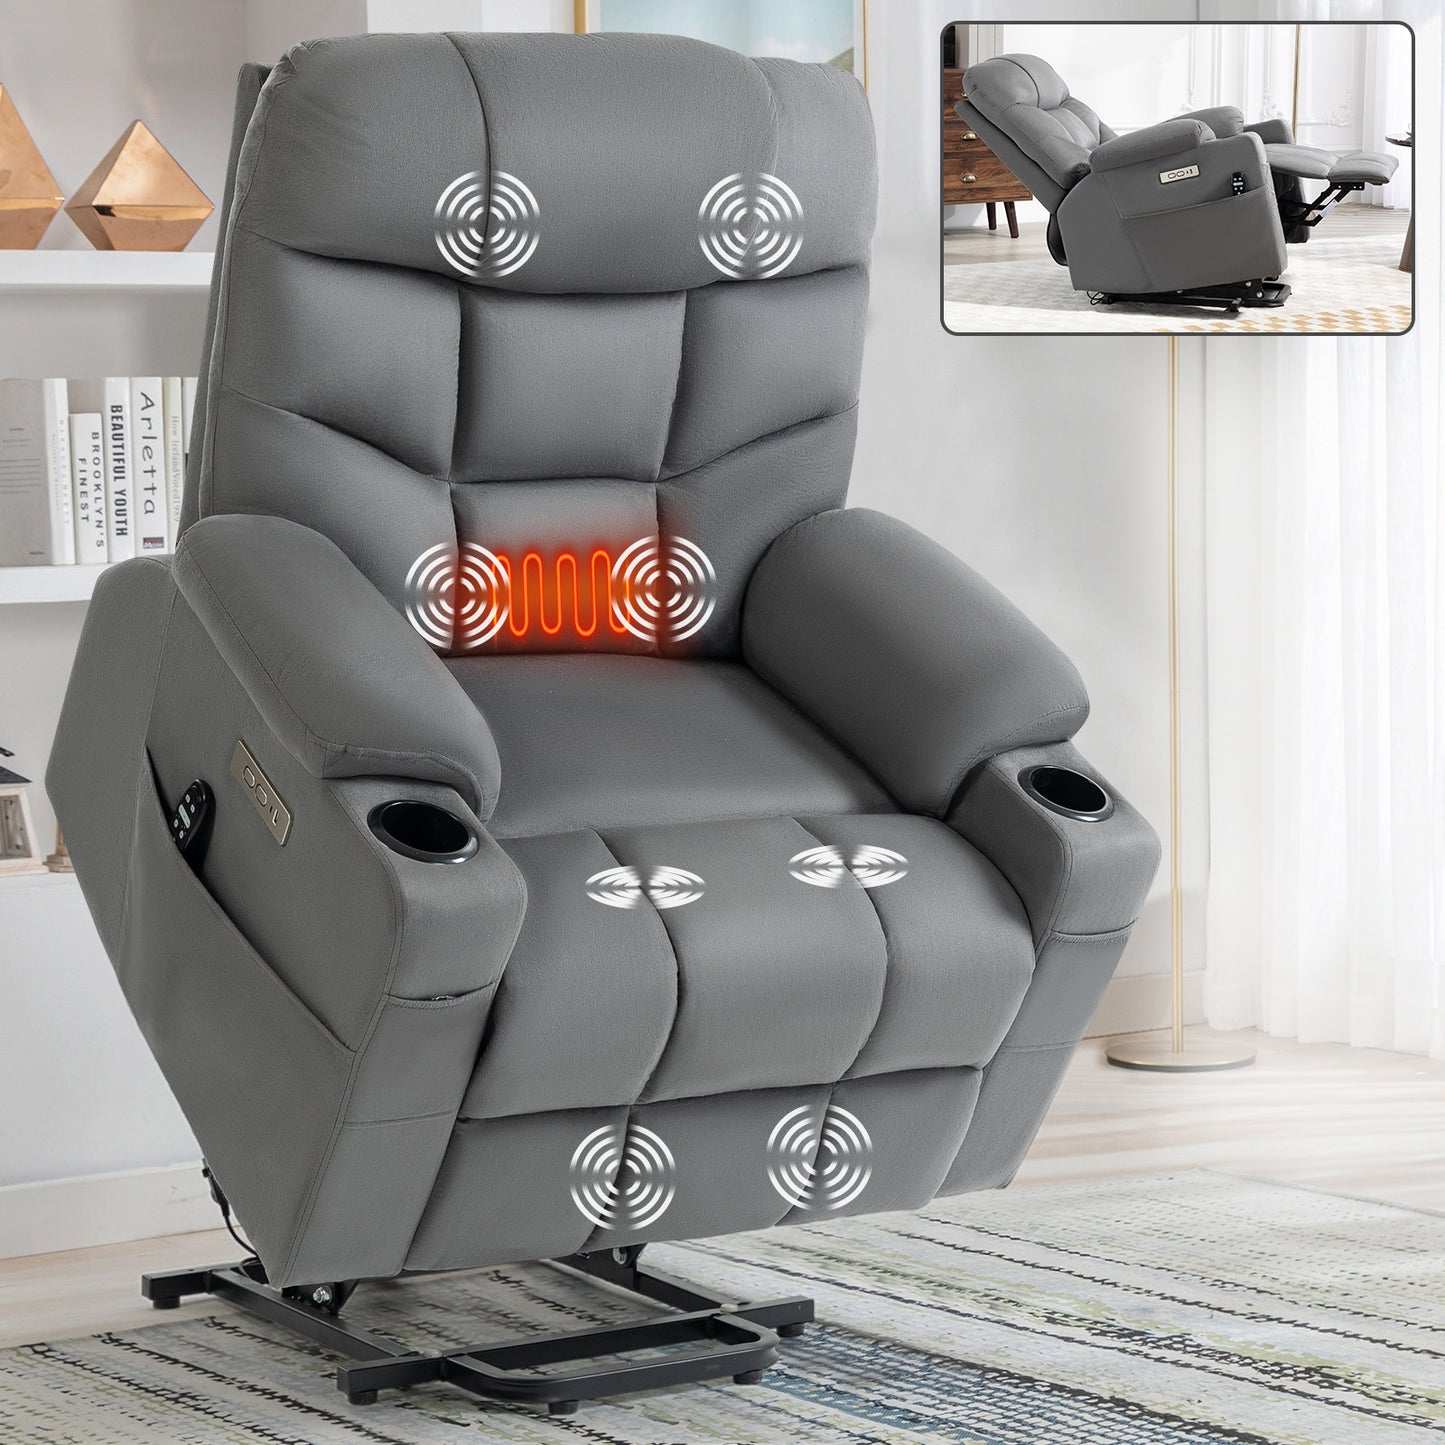 Okin Motor Up to 350 LBS Power Lift Recliner Chair, Heavy Duty Motion Mechanism with 8-Point Vibration Massage and Lumbar Heating, Cup Holders, USB and Type-C Ports, Removable Cushions, Grey